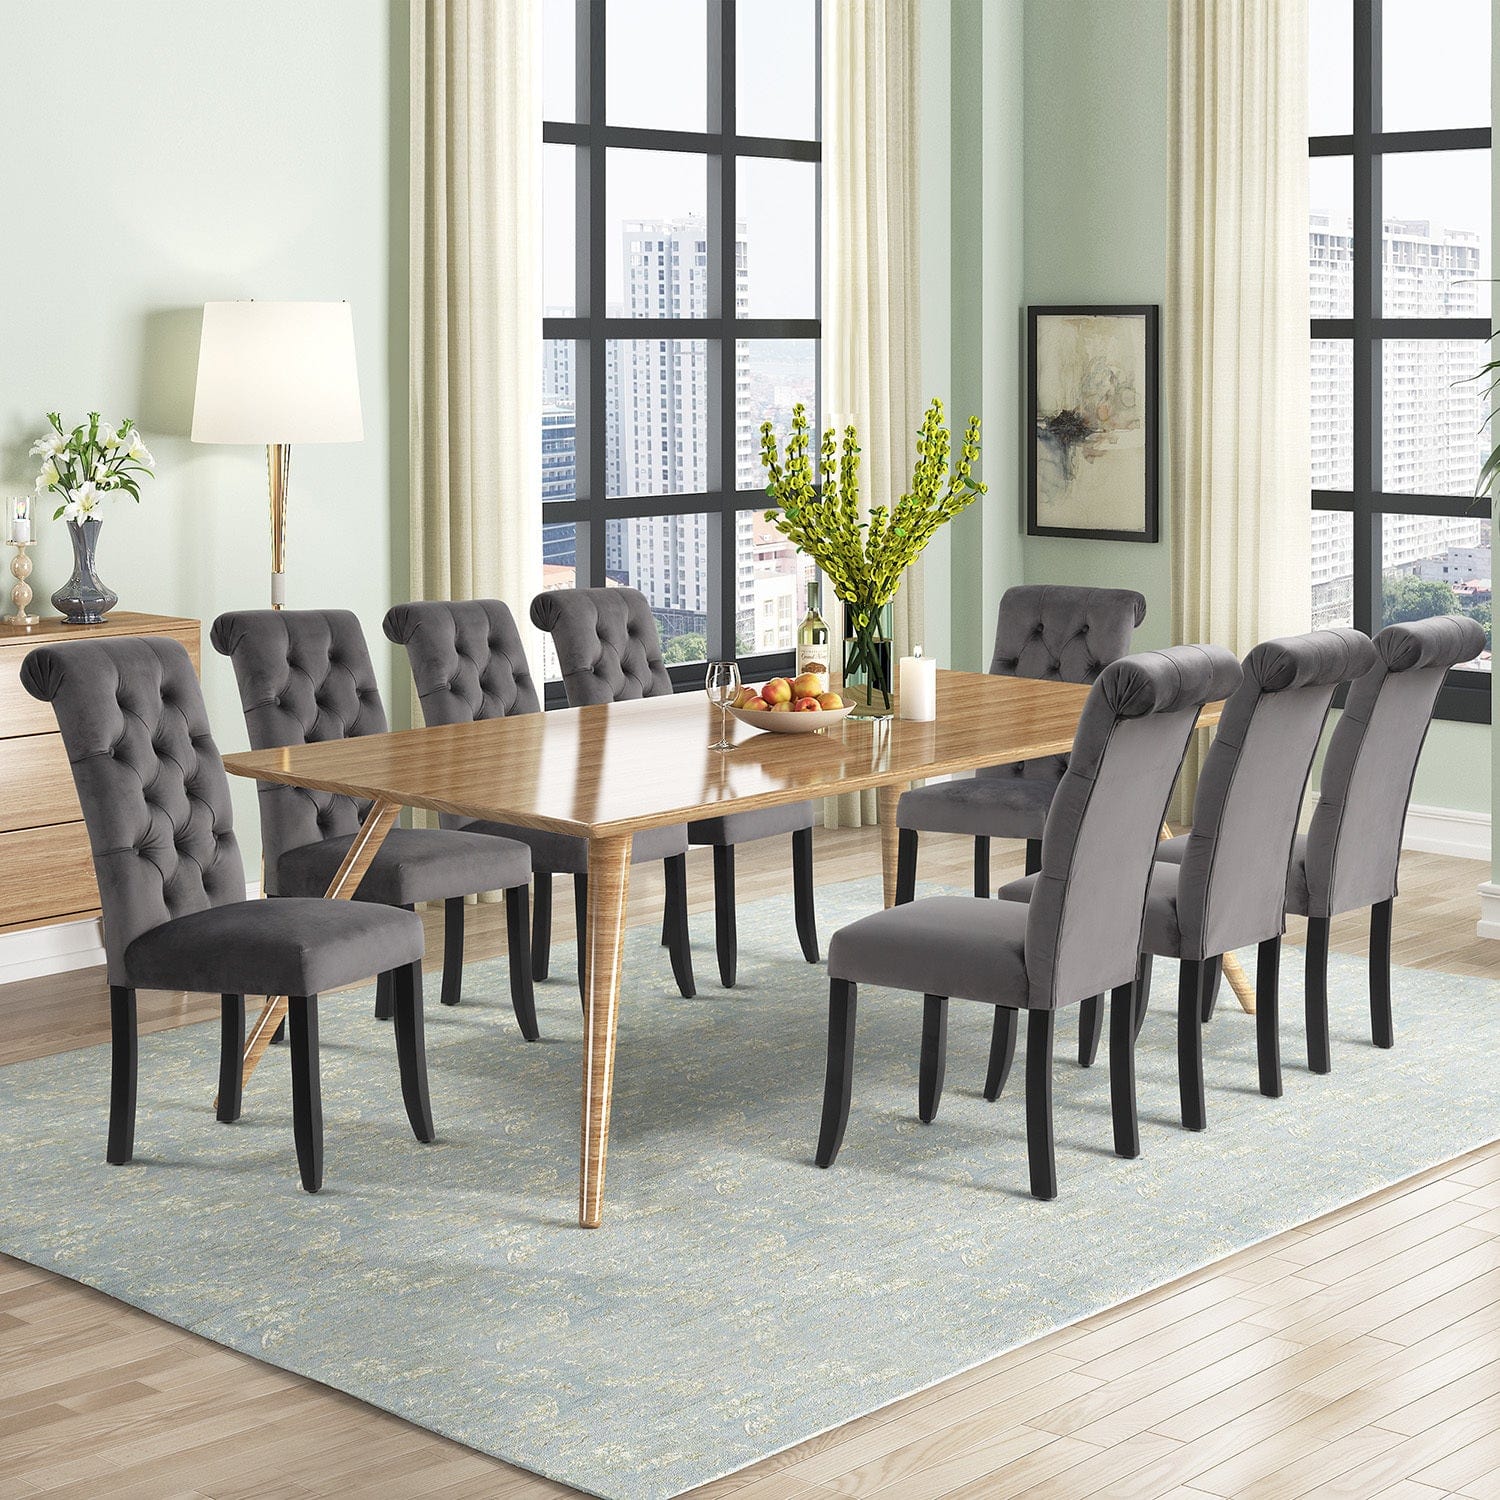 1st Choice Furniture Direct Dining Chair Set 1st Choice Set of 2 Classic Fabric Tufted Dining Chair w/ Wooden Legs